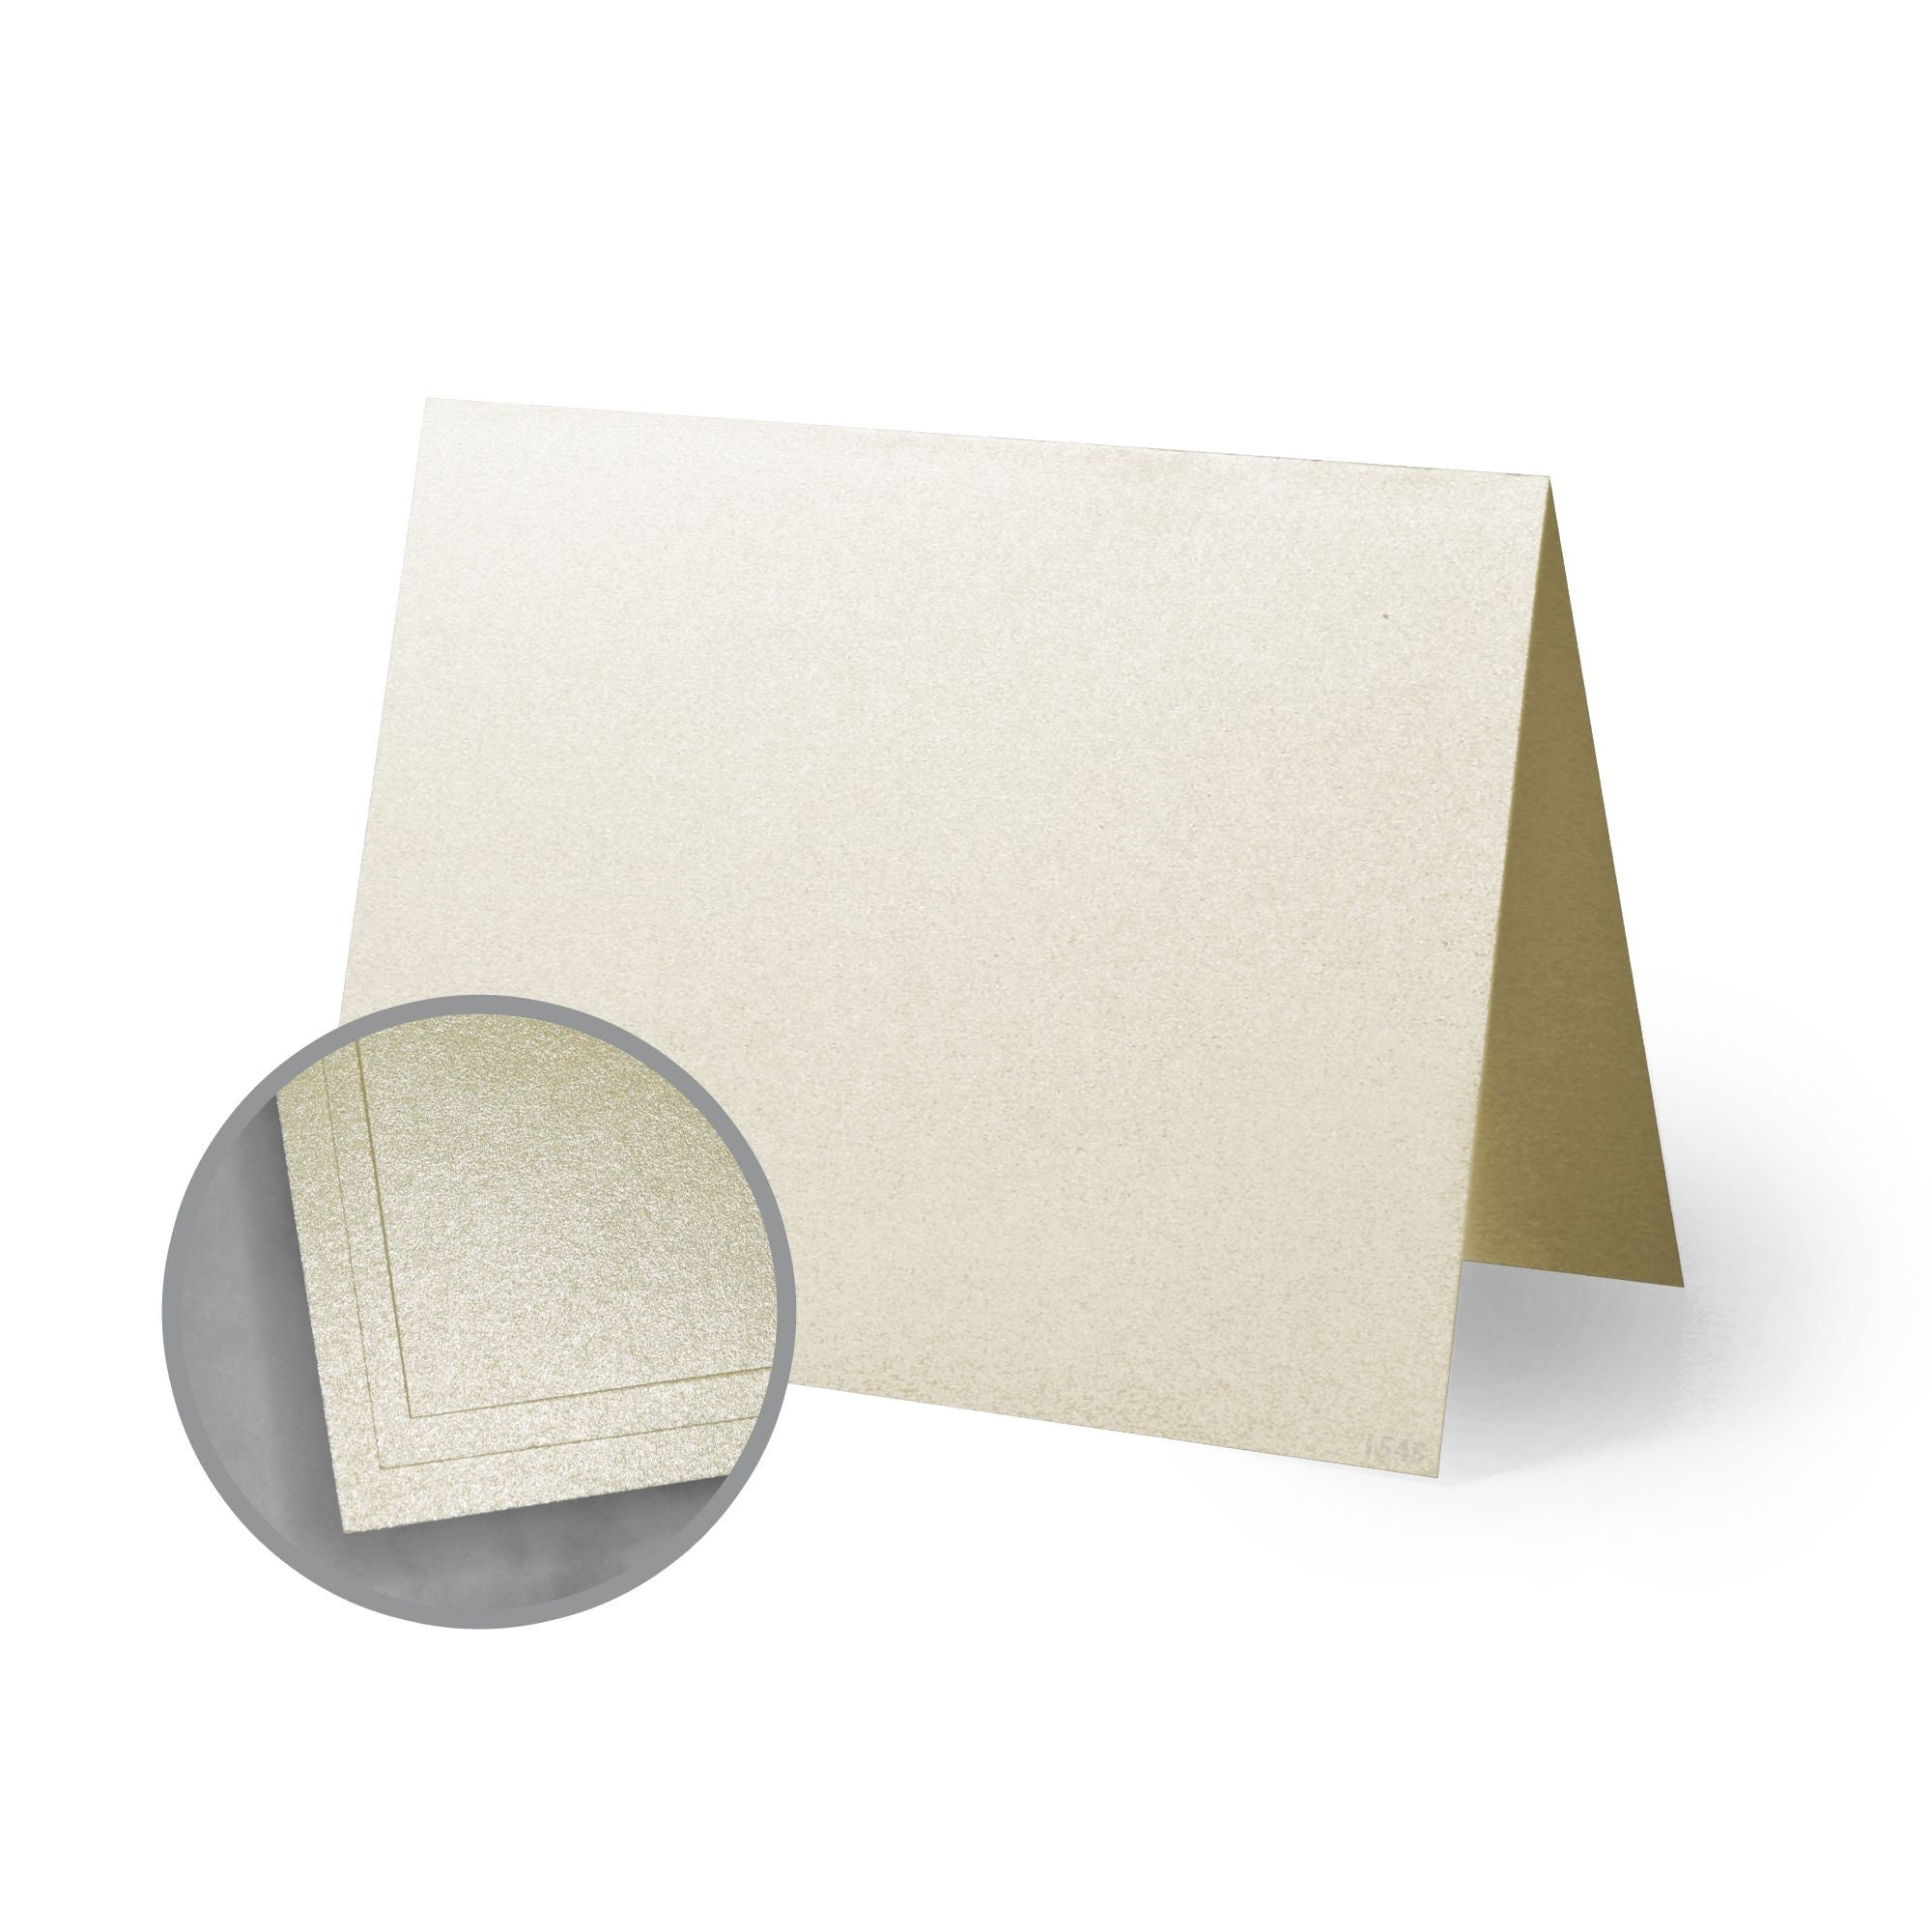 Neenah Creative Collection Metallic Cardstock - 24 Sheets, 8.5 x 11 in -  Foods Co.